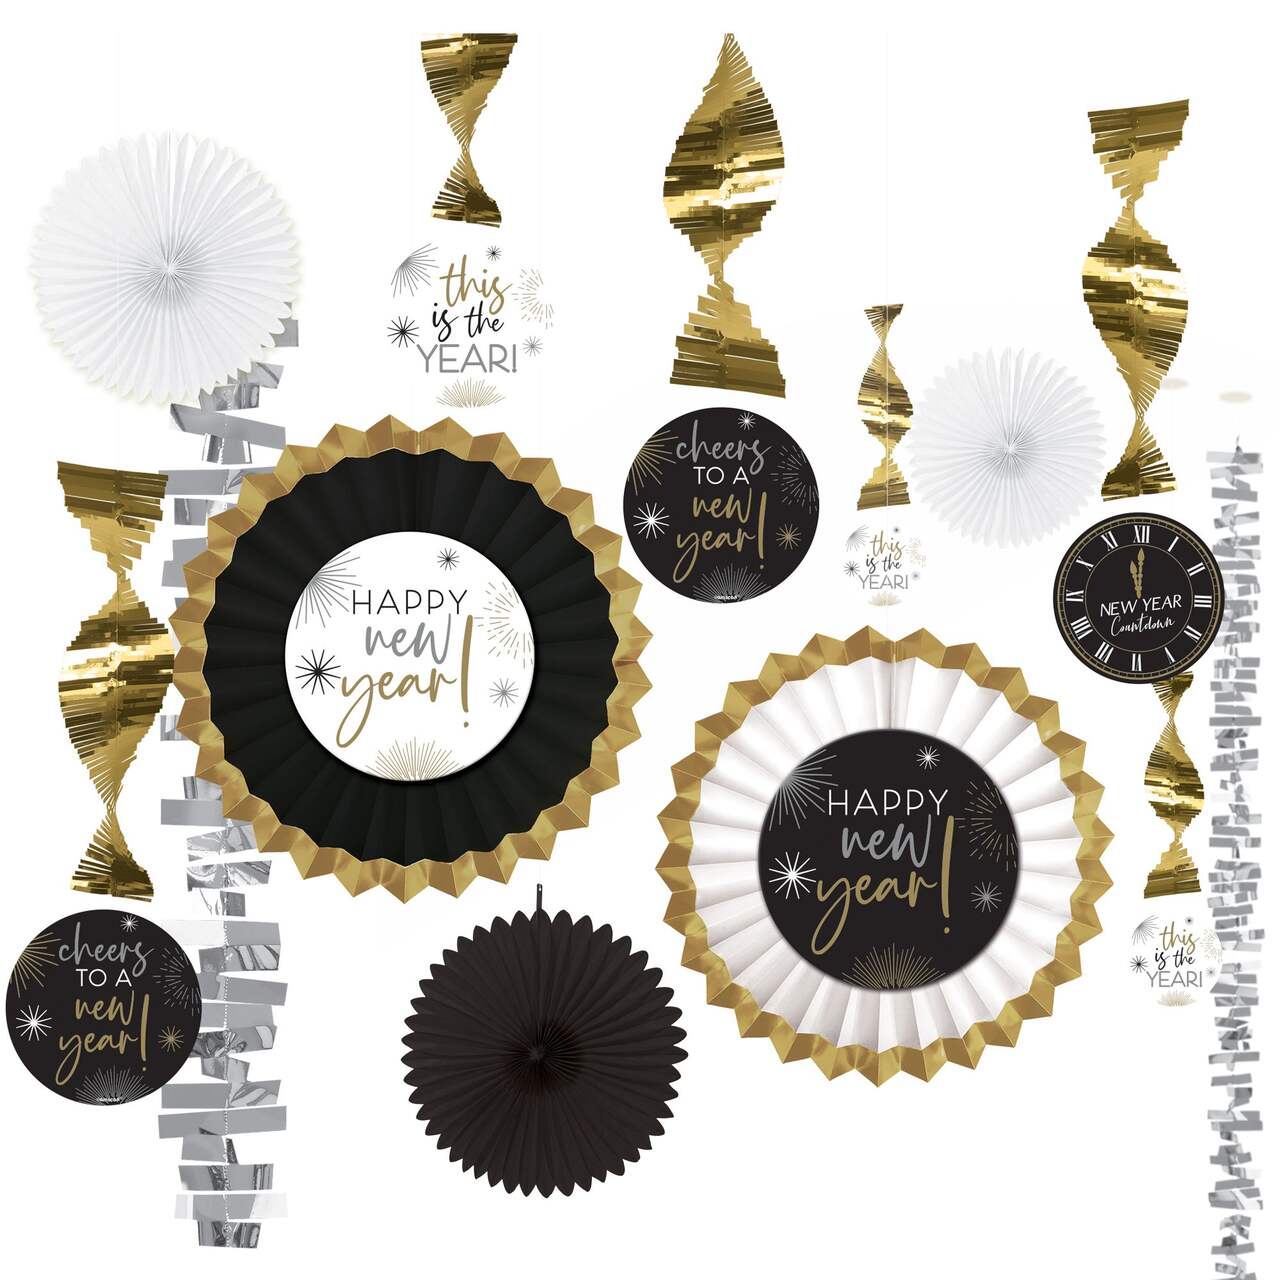 Amscan BSG New Year's Paper & Foil Decorating Kit, 13-pc